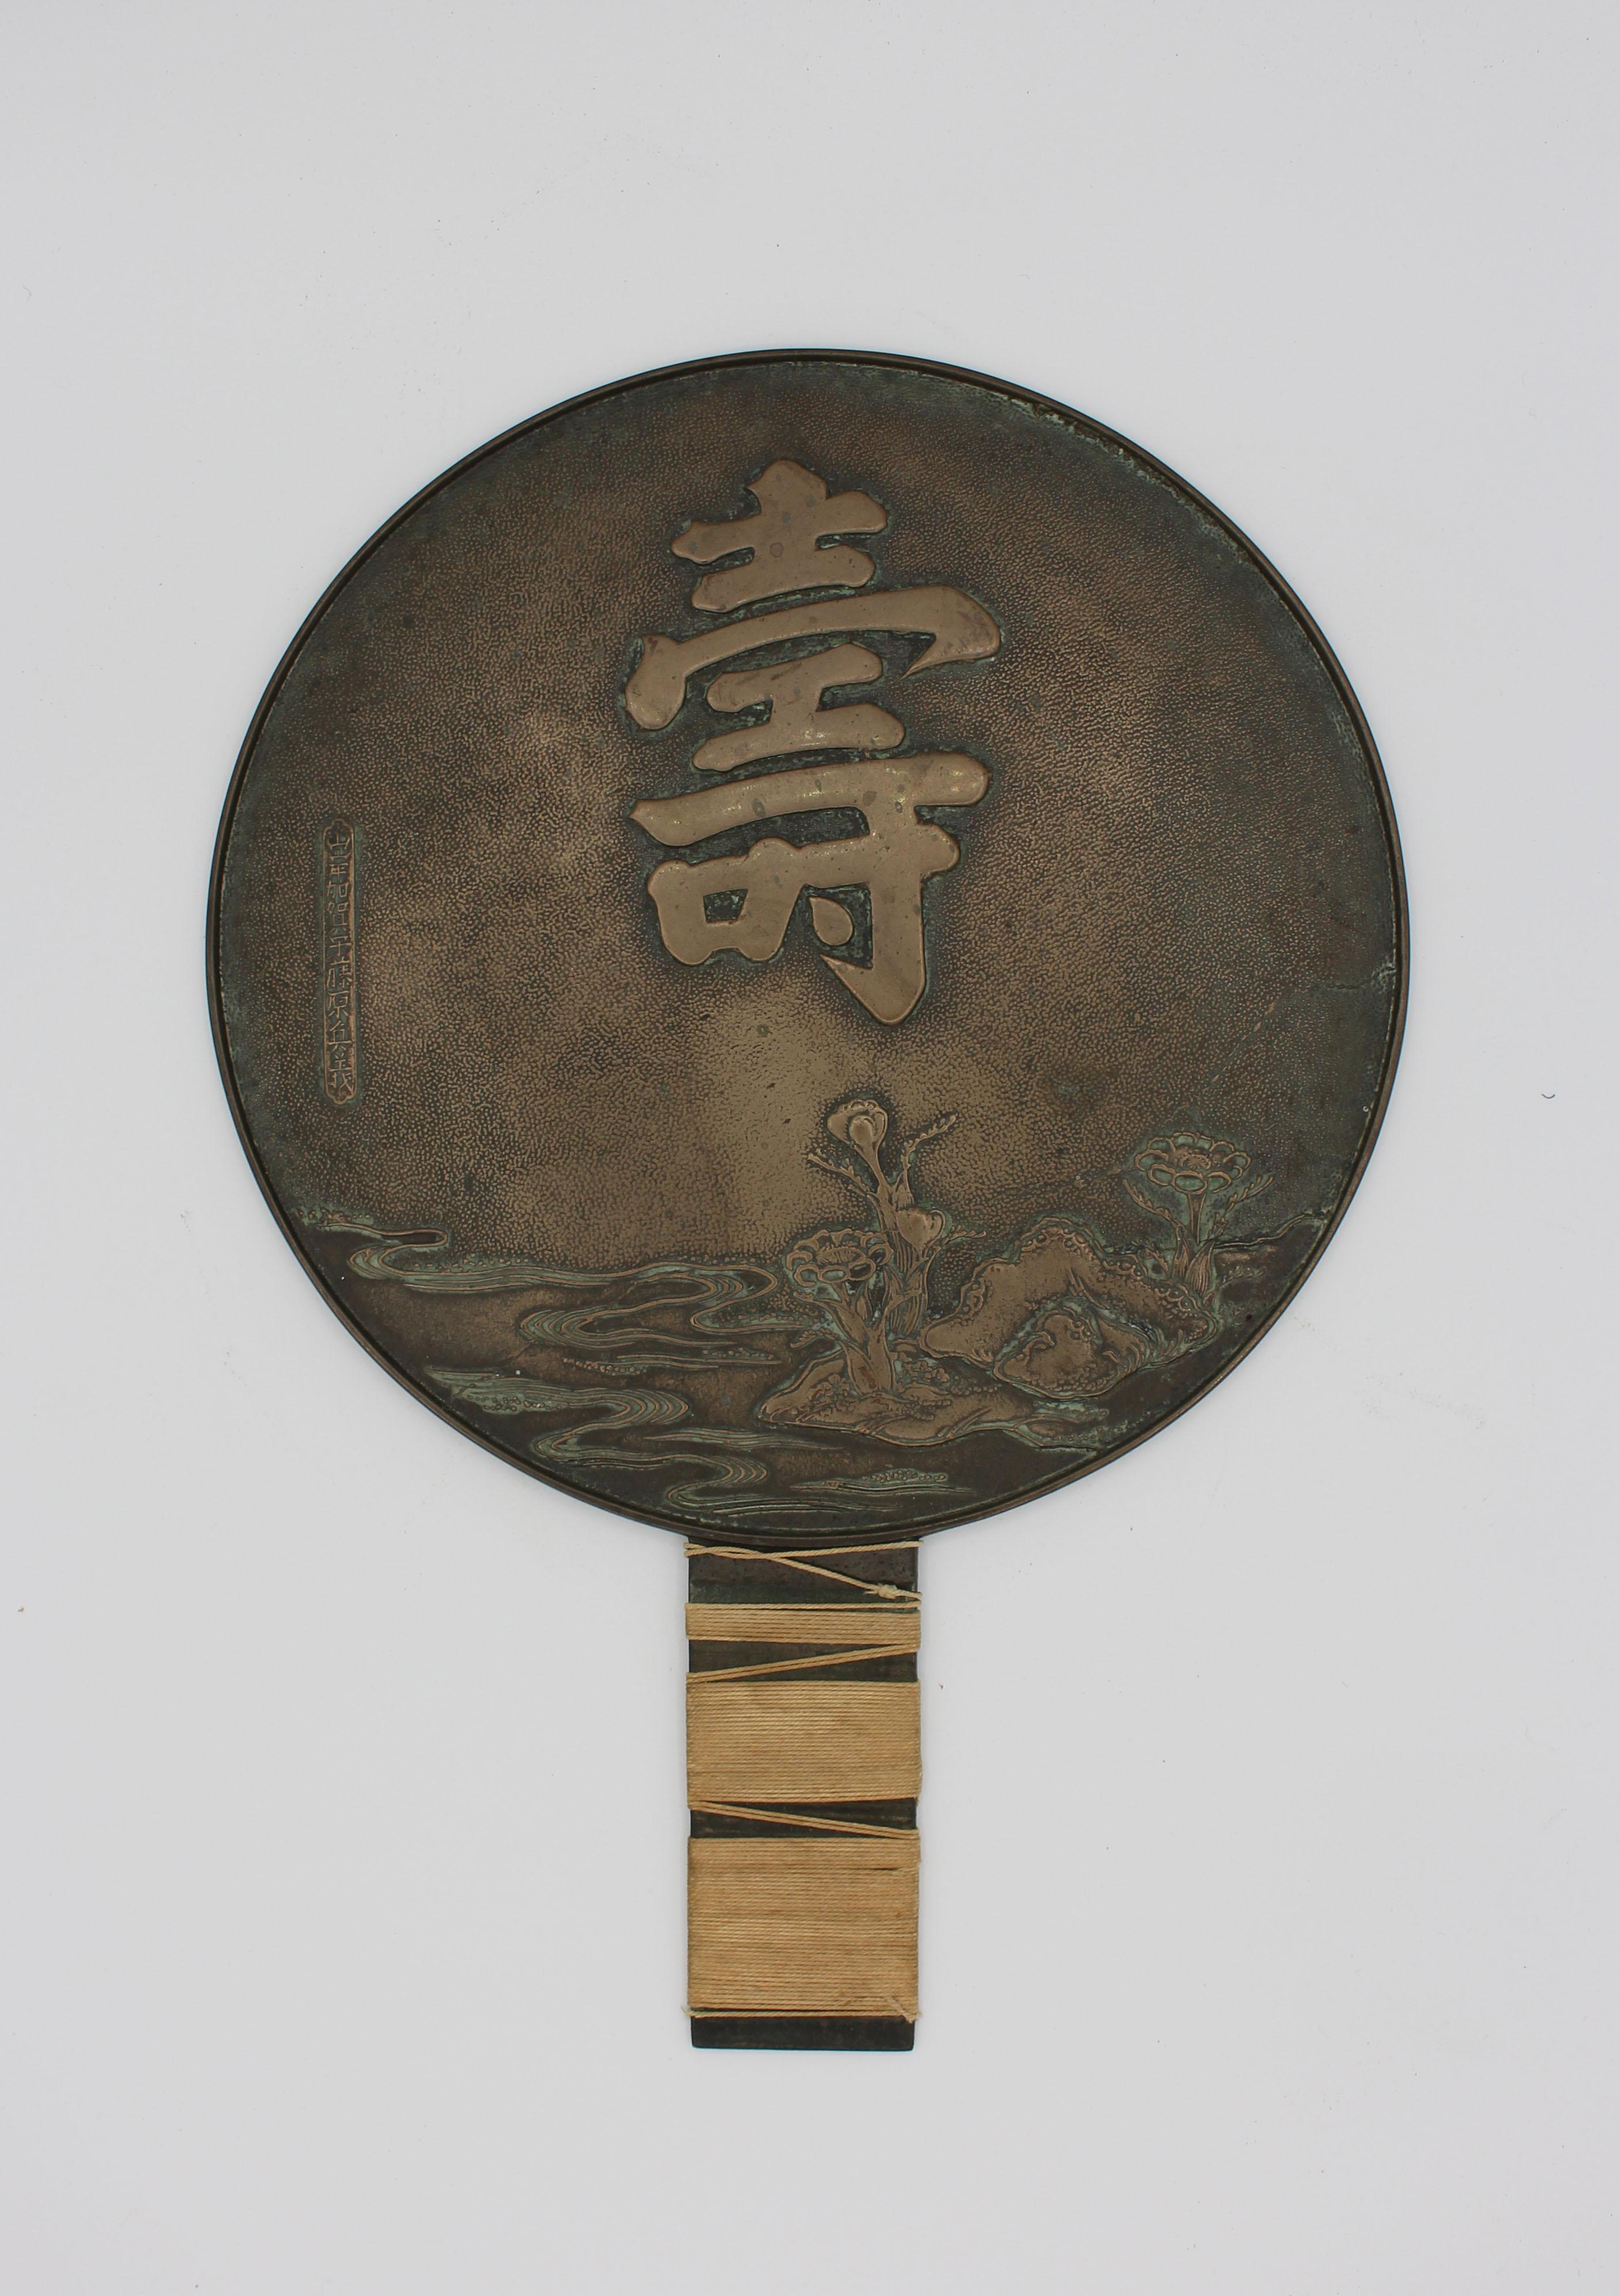 Japanese bronze mirror. Great surface colors; old string handle wrap, Meiji period 1868-1912. Wear from polishing. Extensive inscription. 9 5/16